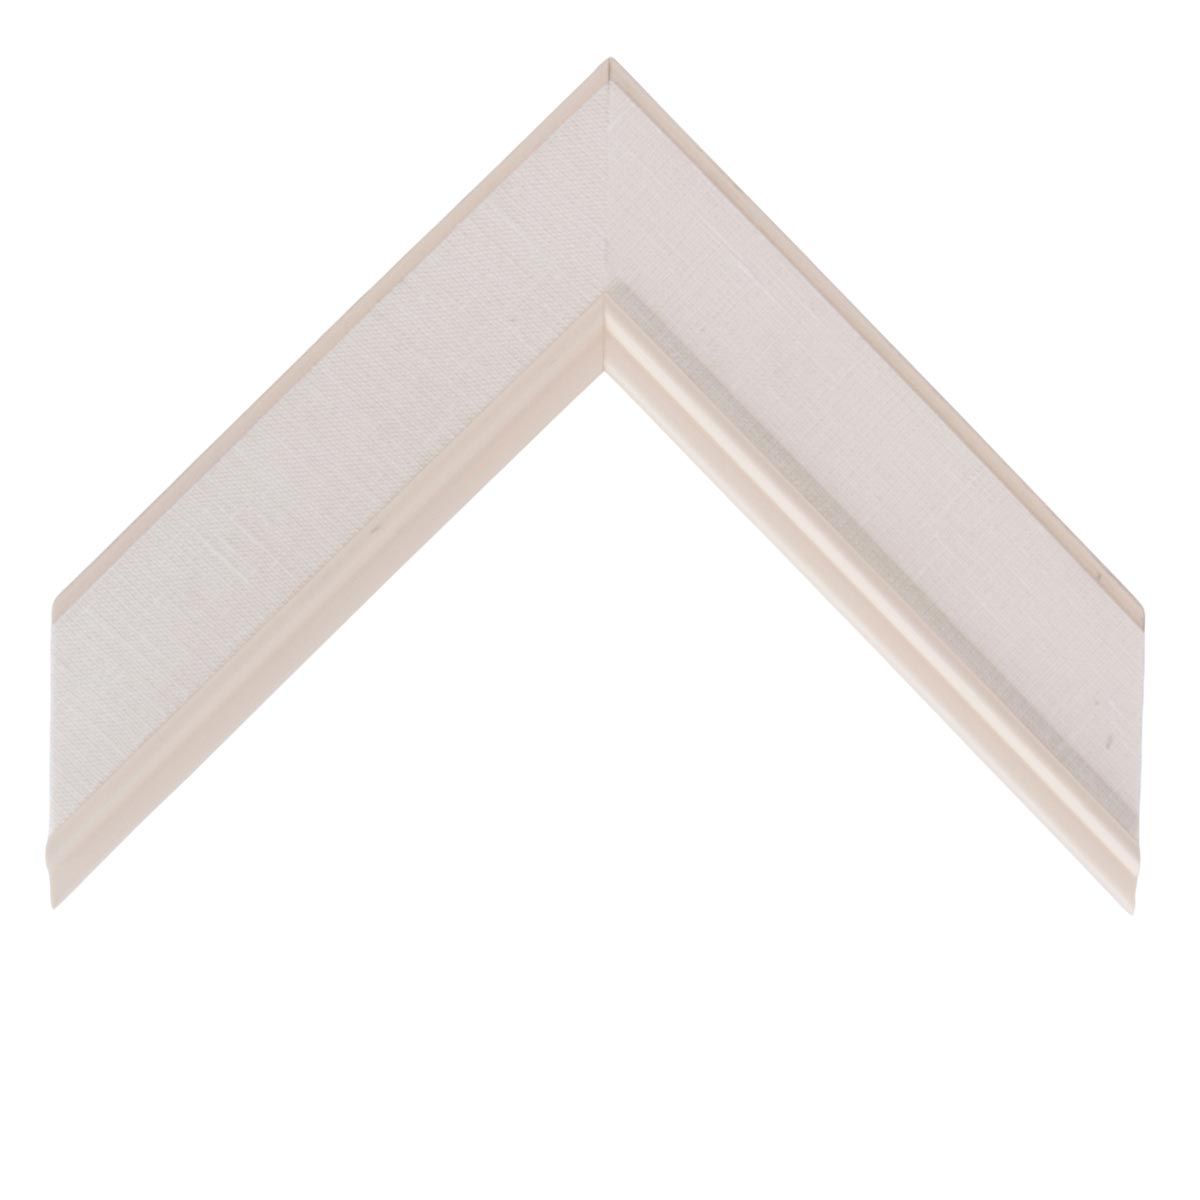 Linen Liner Moulding - Natural, White Bead ML120-1 ¾, 18 x 24 inches